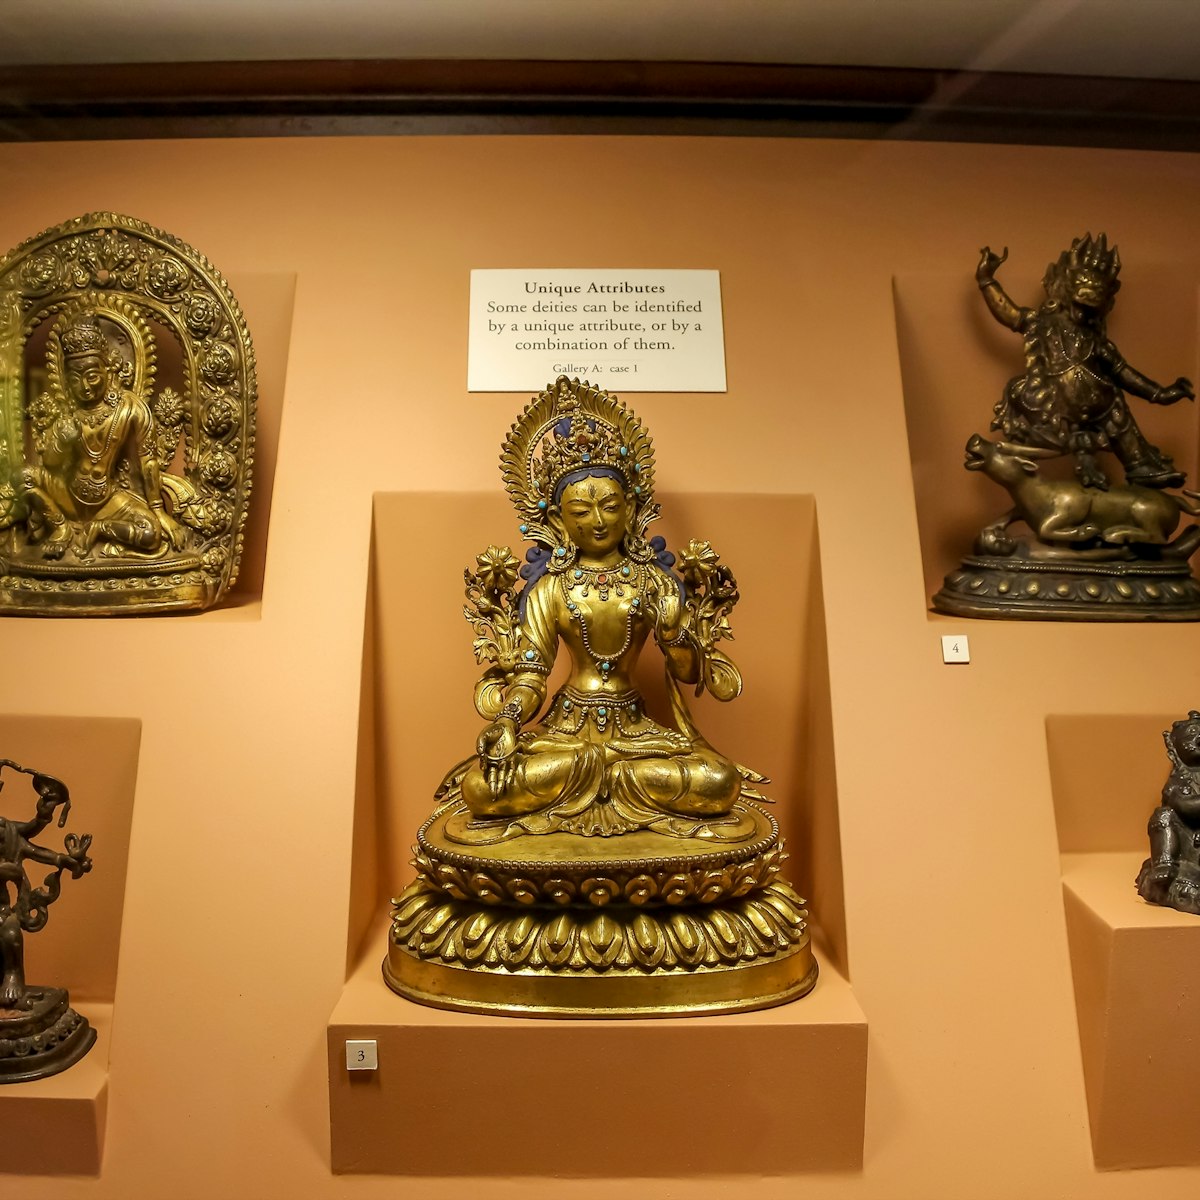 Group of bronze Buddha and Hindu Gods figurines in a showcase of the Patan Museum.